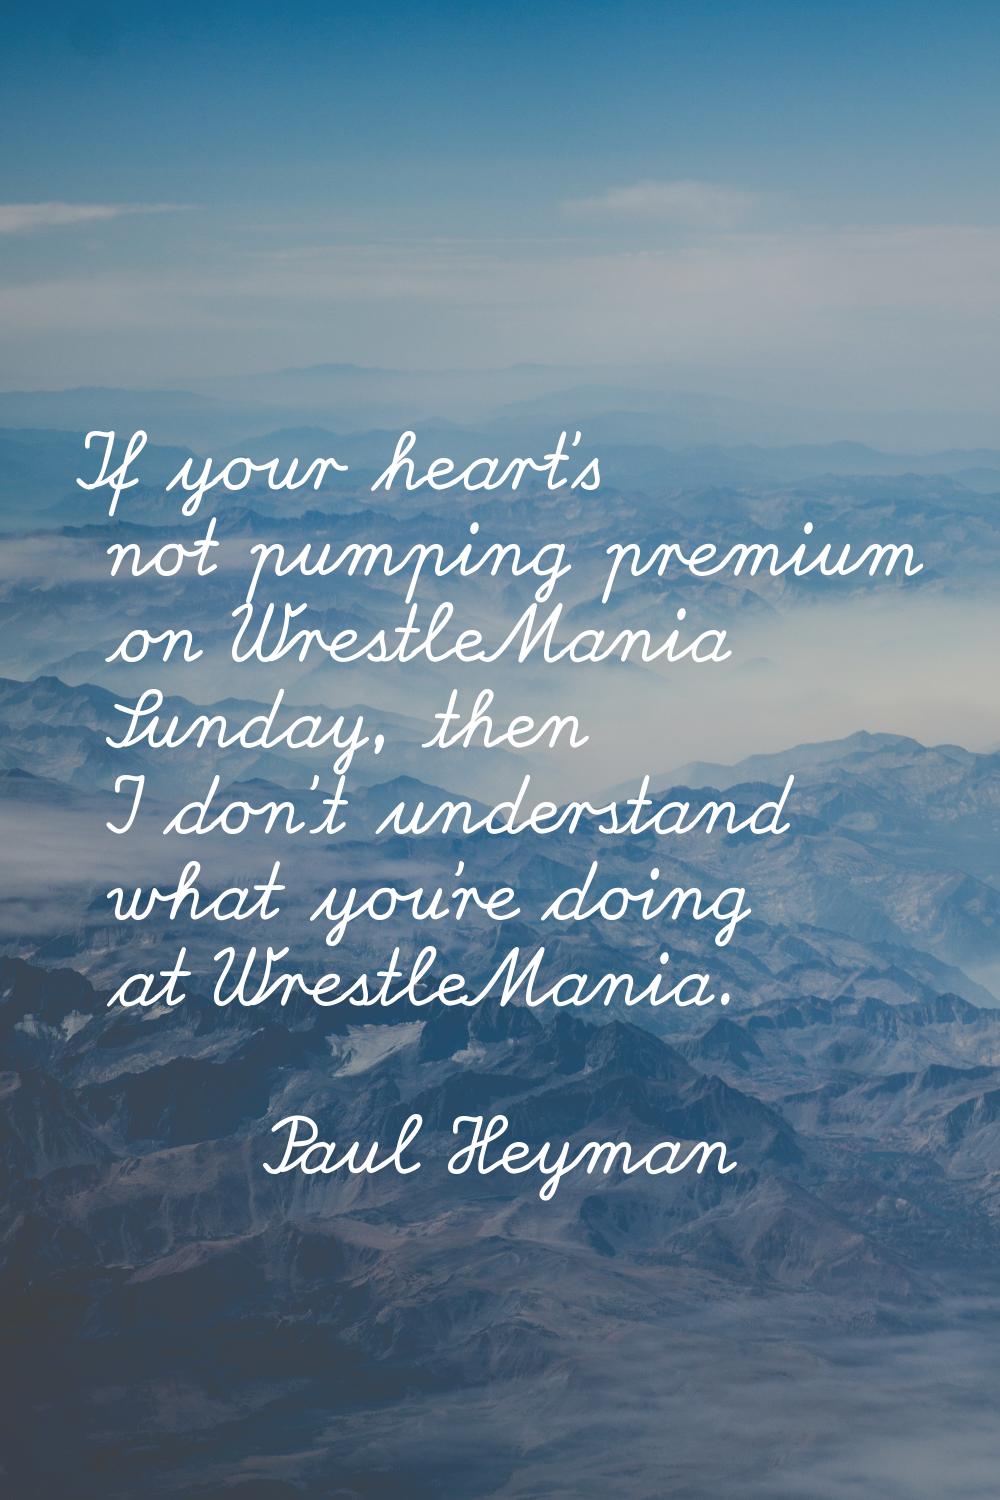 If your heart's not pumping premium on WrestleMania Sunday, then I don't understand what you're doi